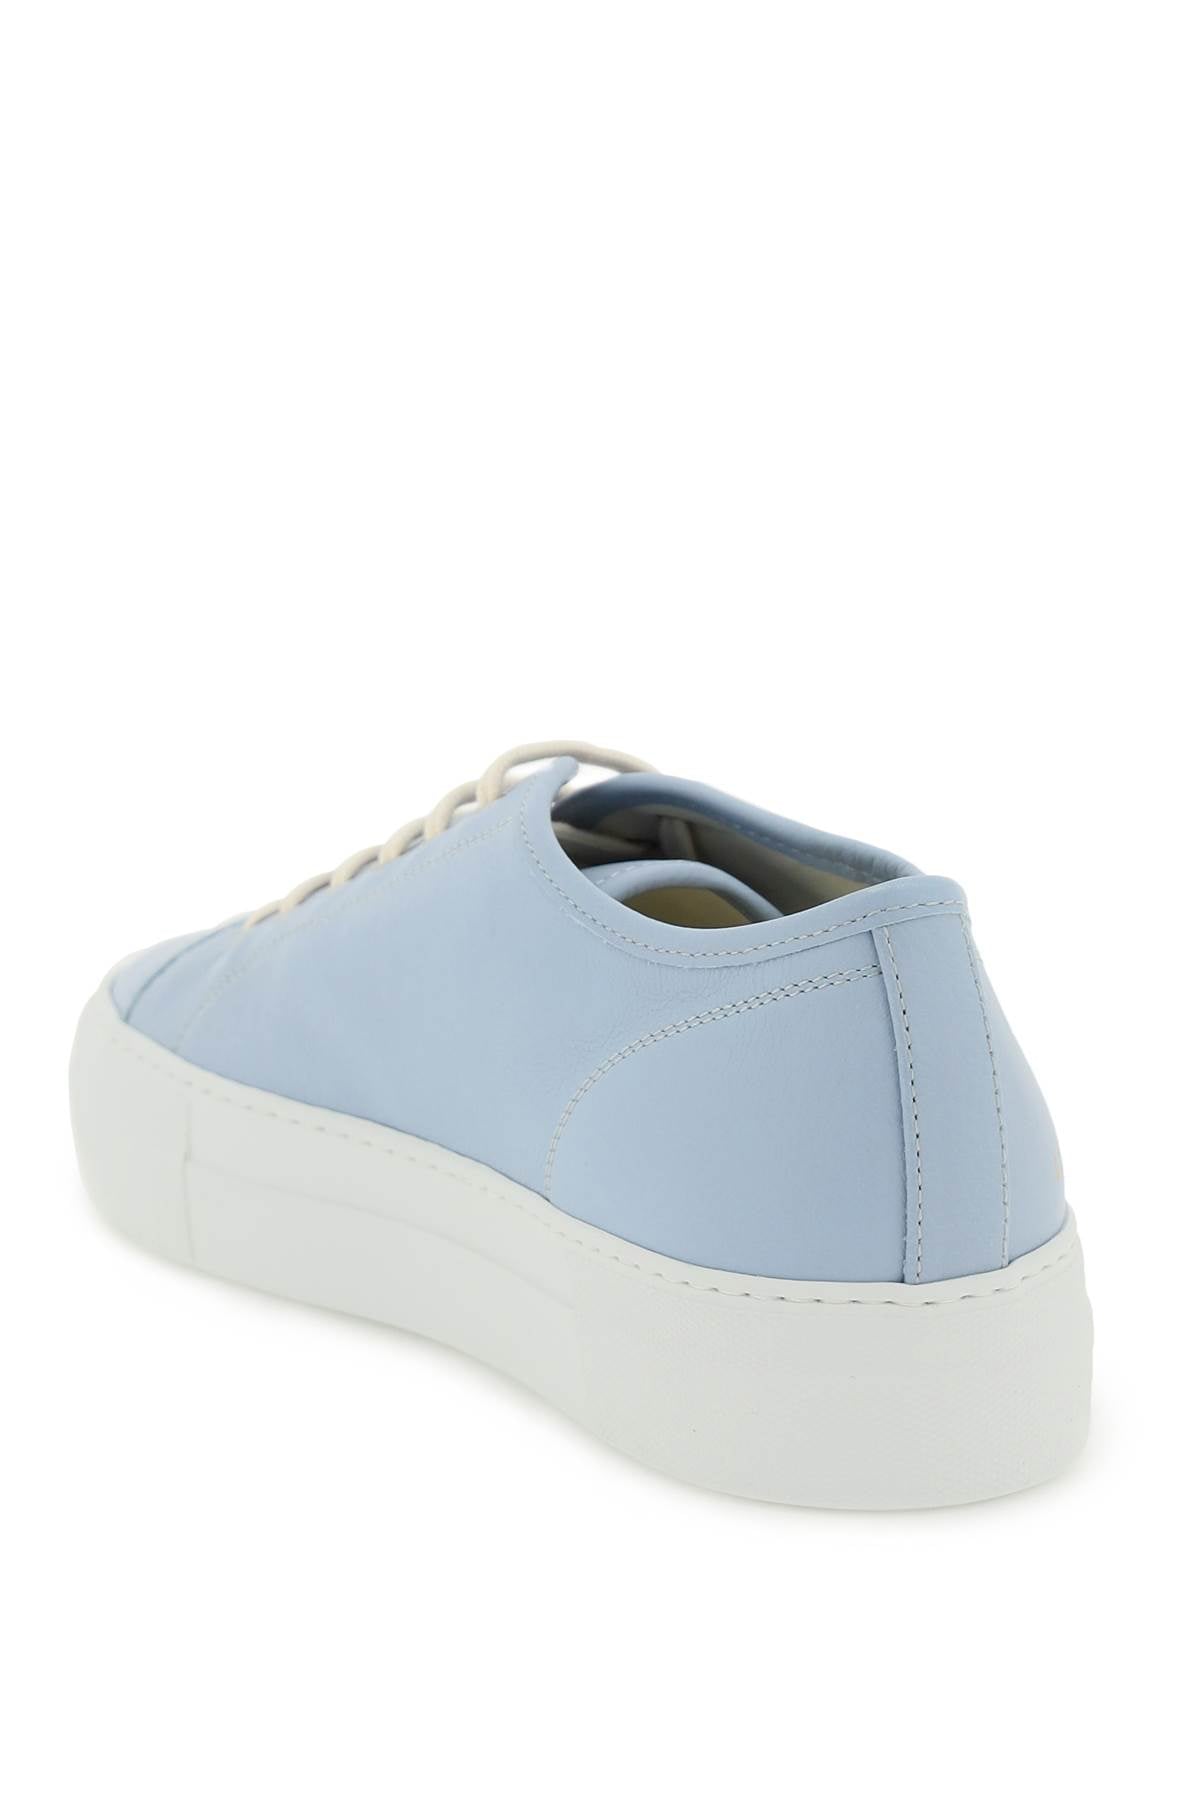 Common projects leather tournament low super sneakers-2